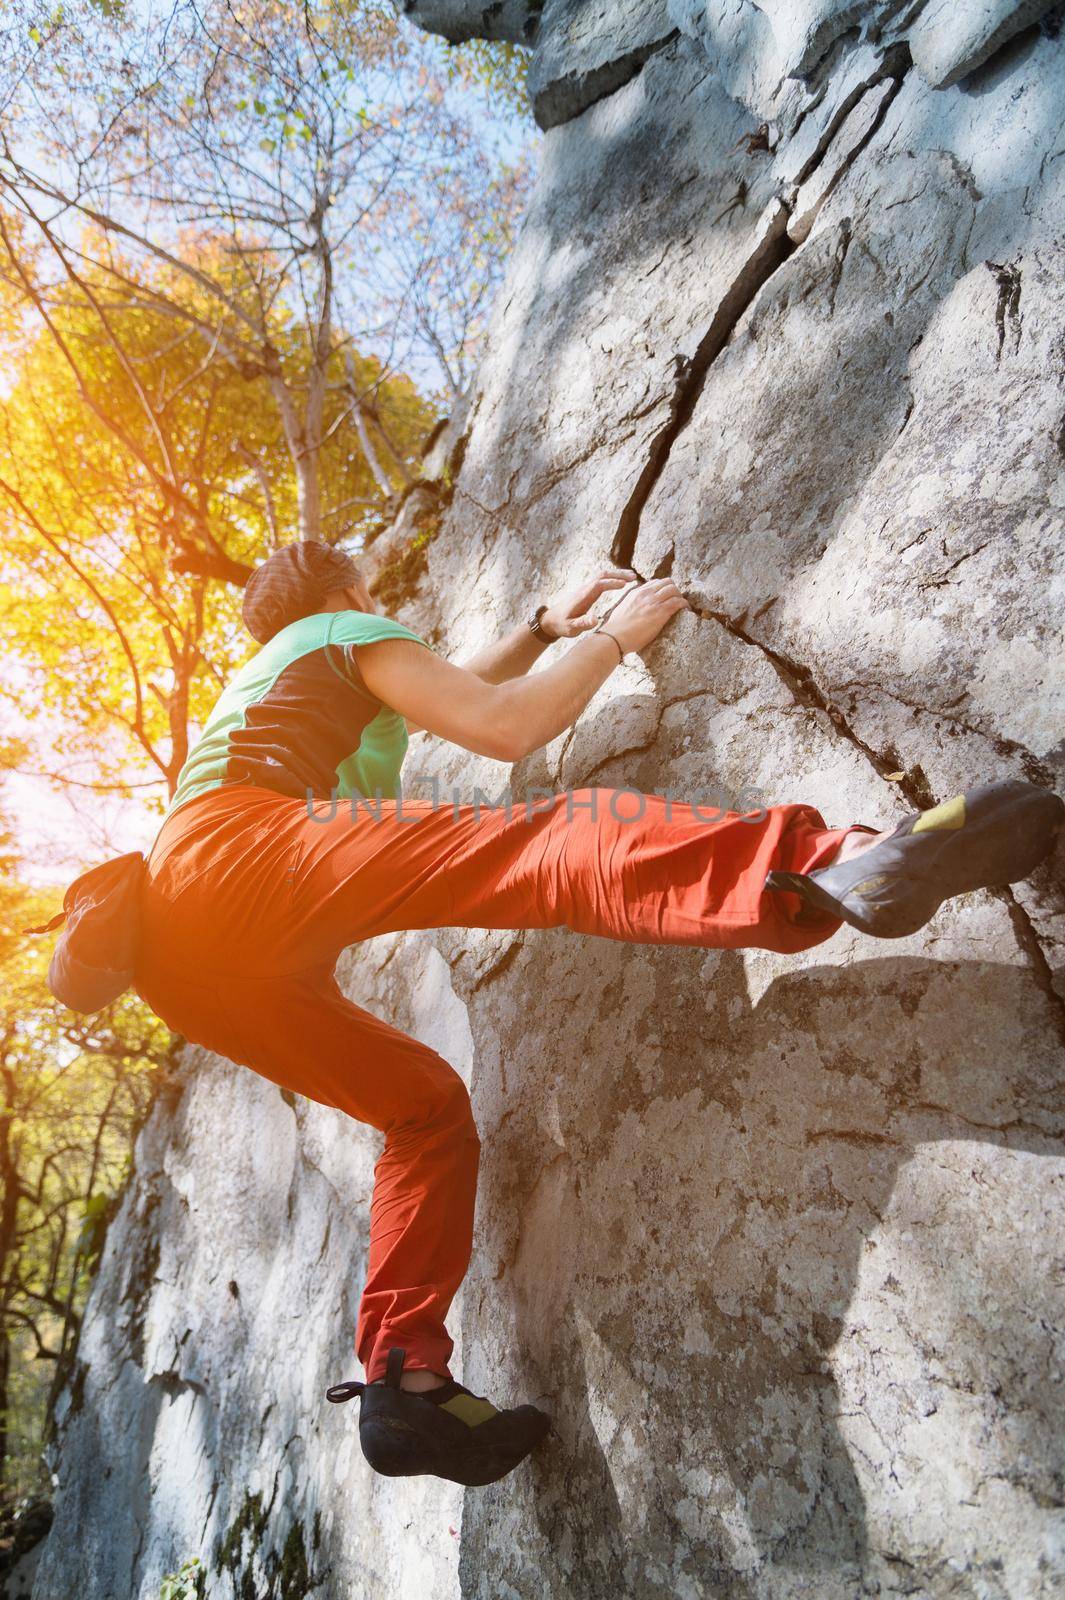 A free aged male climber hangs on a rock wall in a forest in the mountains. Mature Sports Concept by yanik88